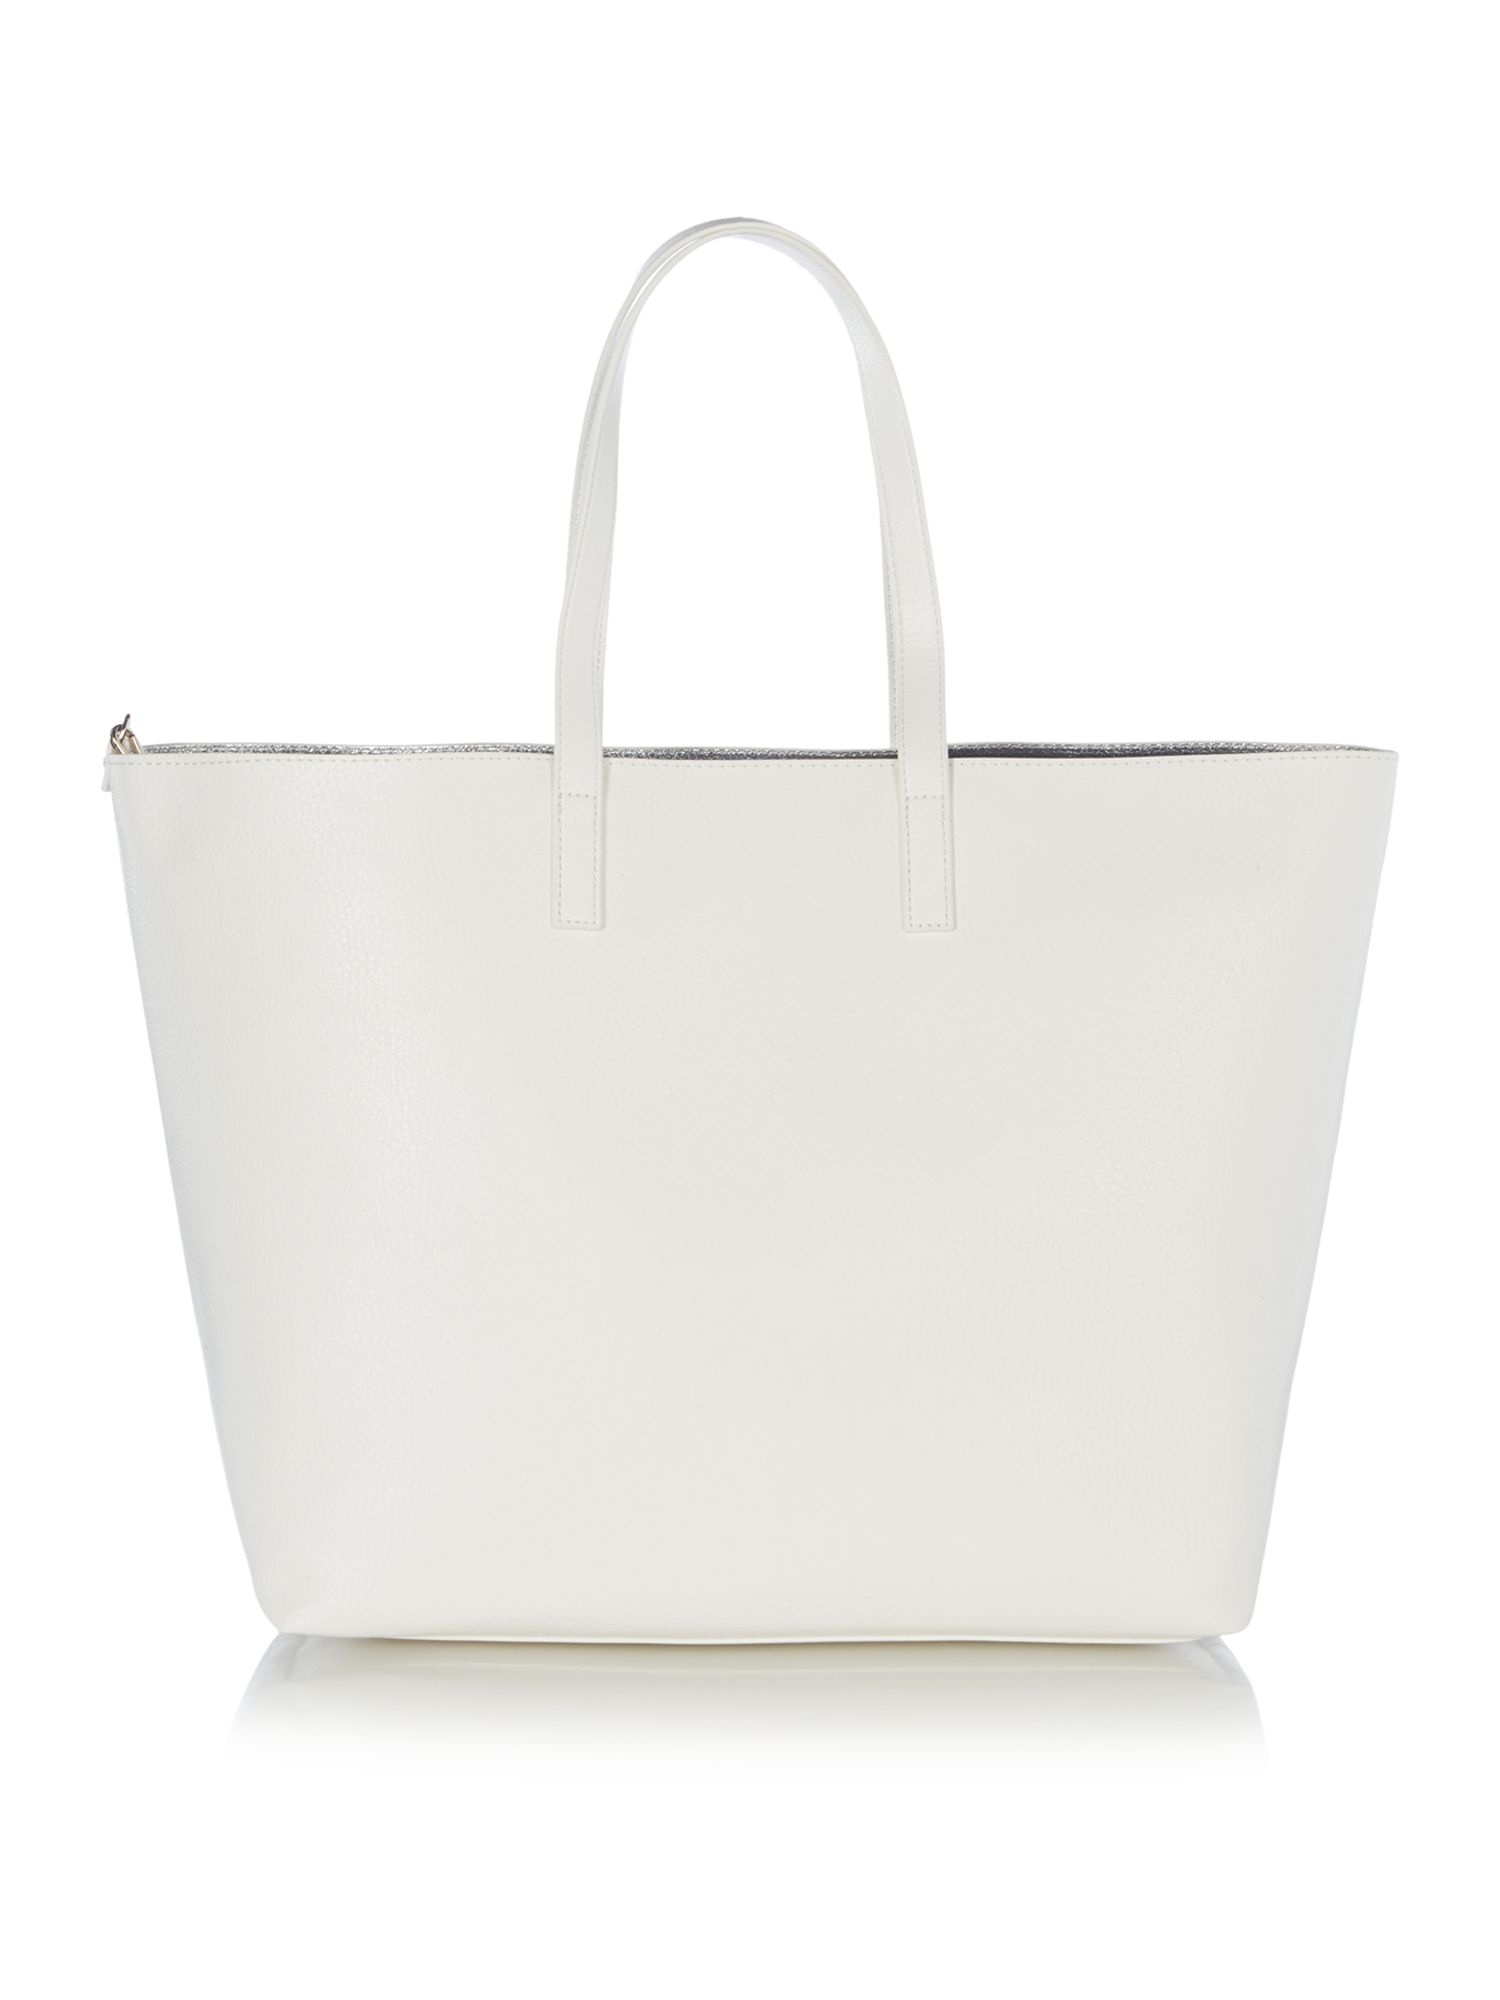 Love moschino Item Shopper White Extra Large Tote Bag in White | Lyst